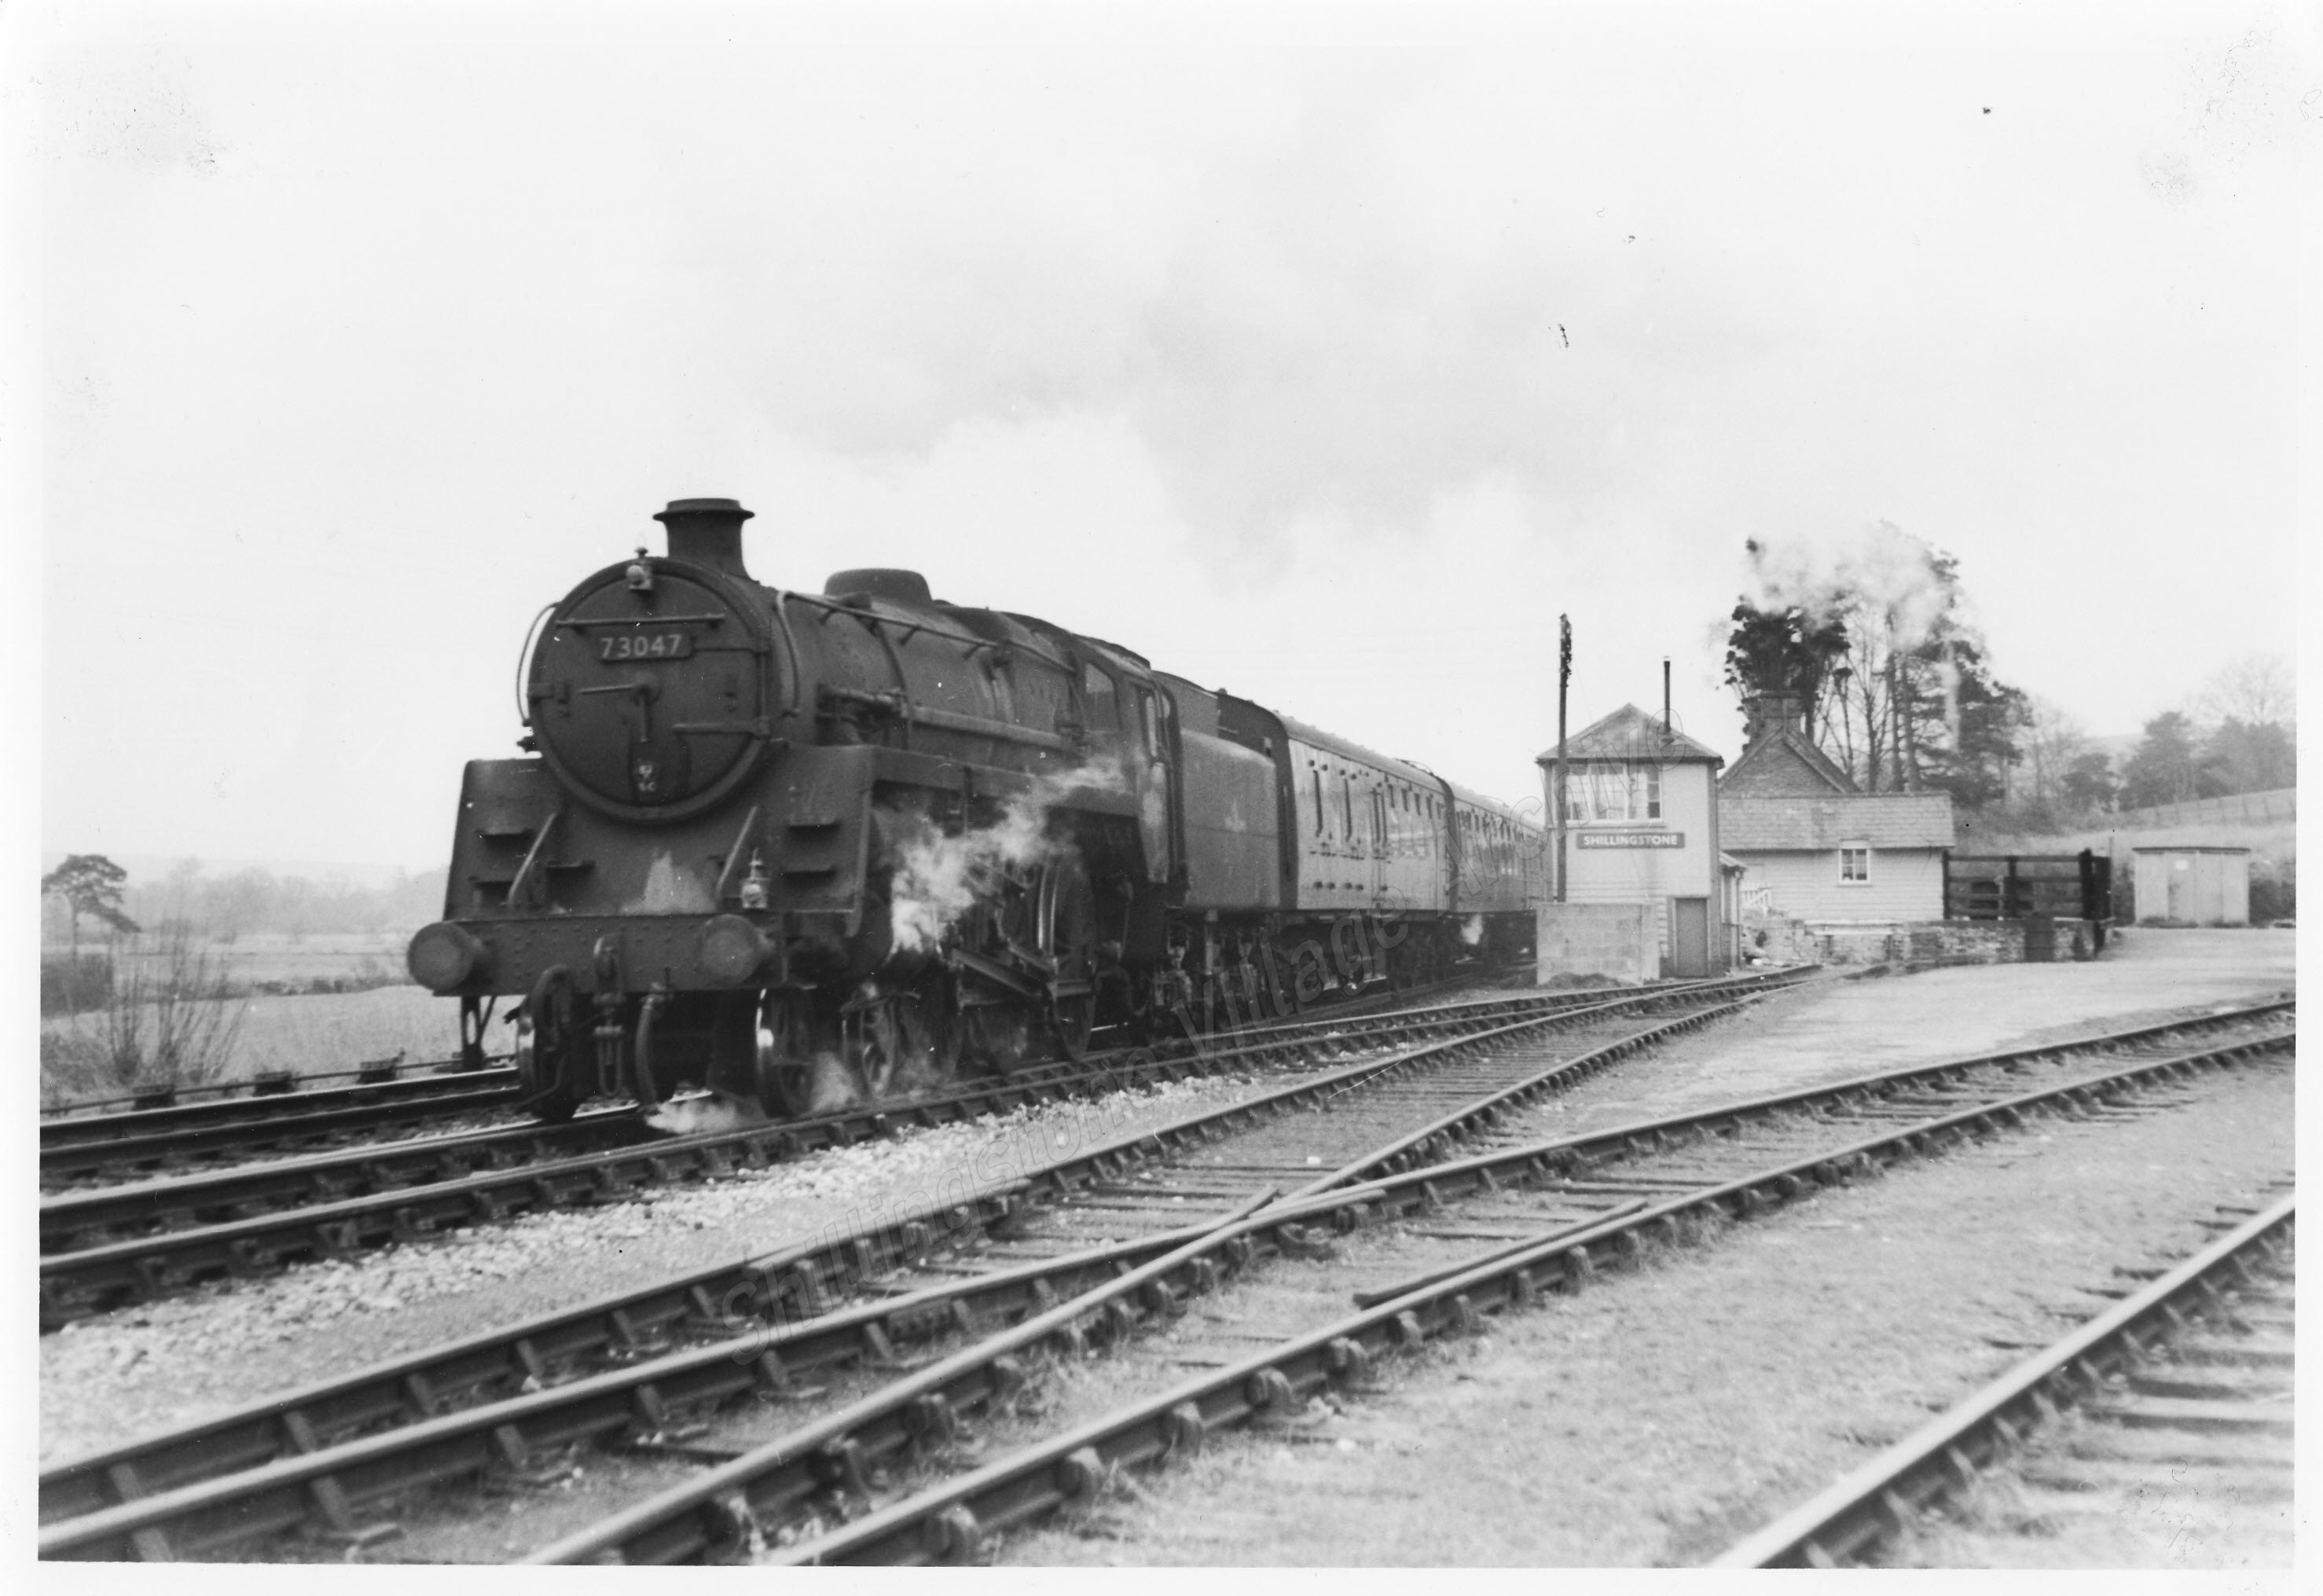 c. 1955: Passenger Train bound for Templecombe pulled by Standard Class 5 Engine #73047 